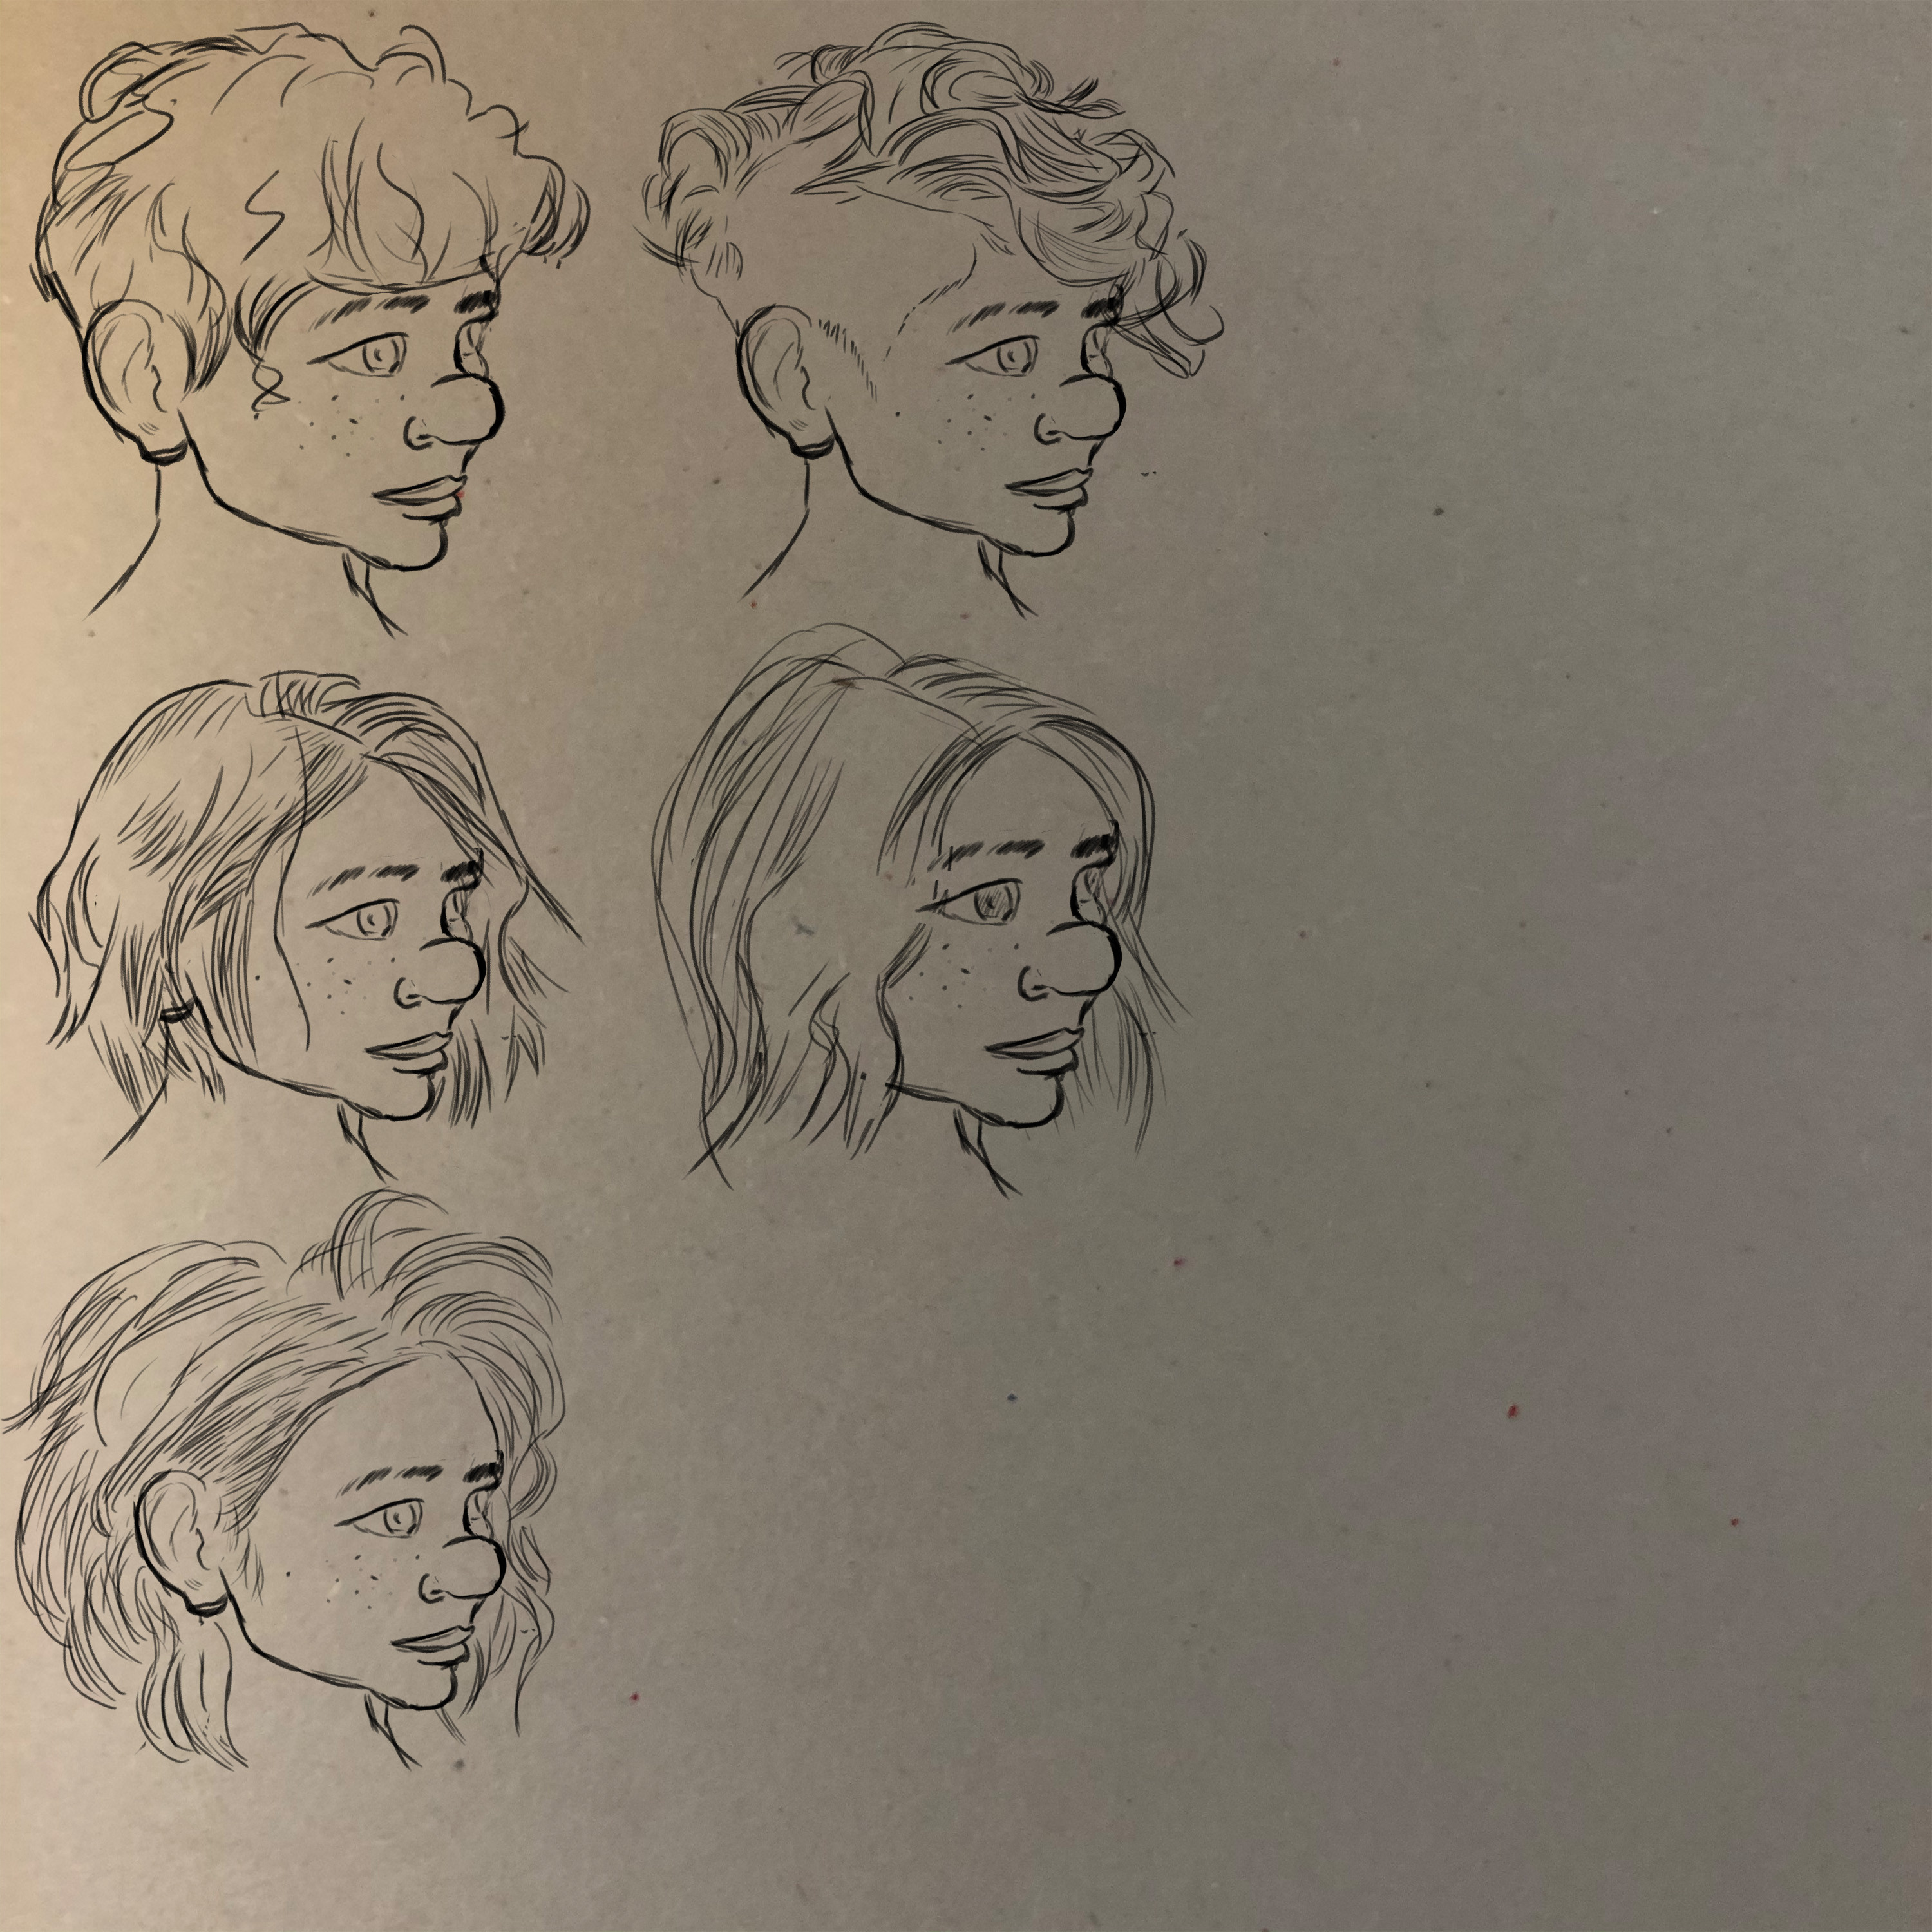 Sketching ideas for a new haircut for her.